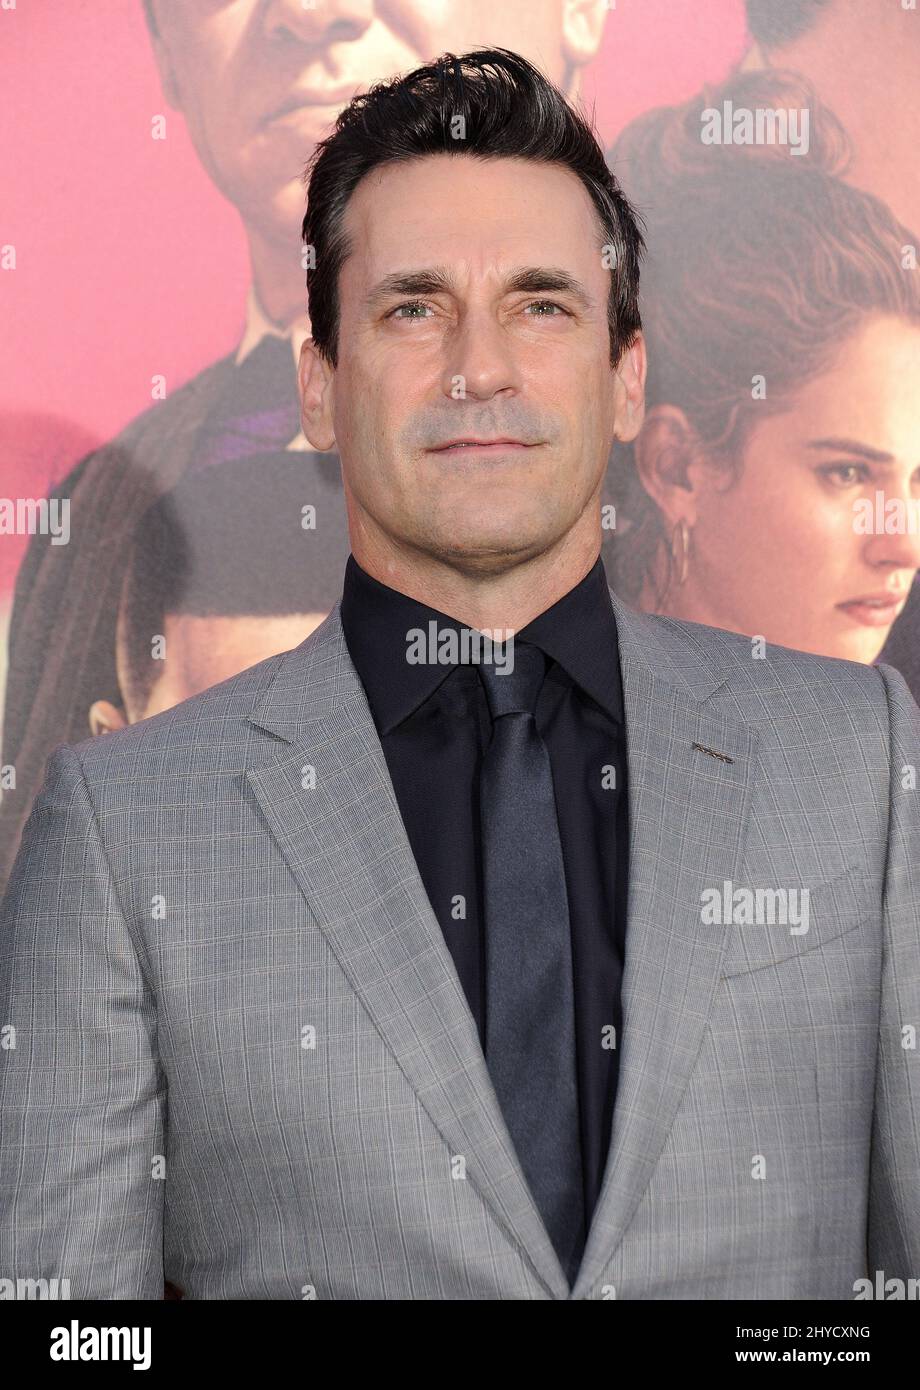 Jon Hamm attending 'Baby Driver' premiere held at the Ace Hotel Downtown in Los Angeles, USA Stock Photo